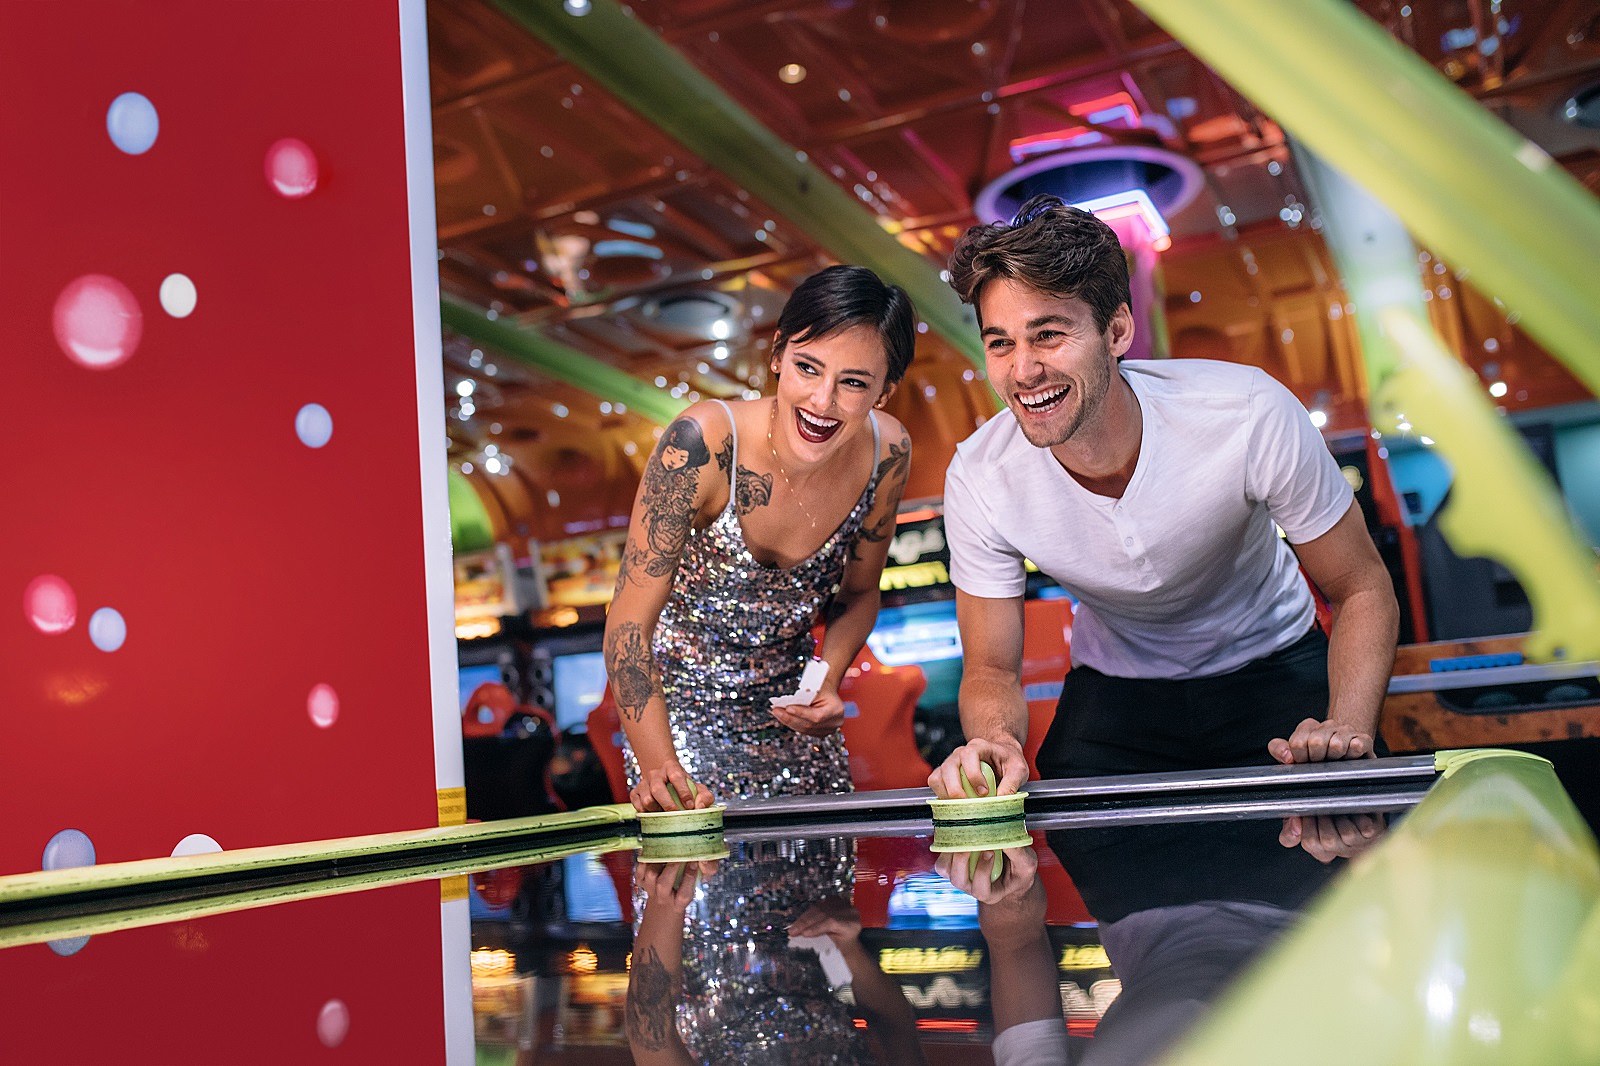 Dave & Buster's opens its first location in Iowa on July 31